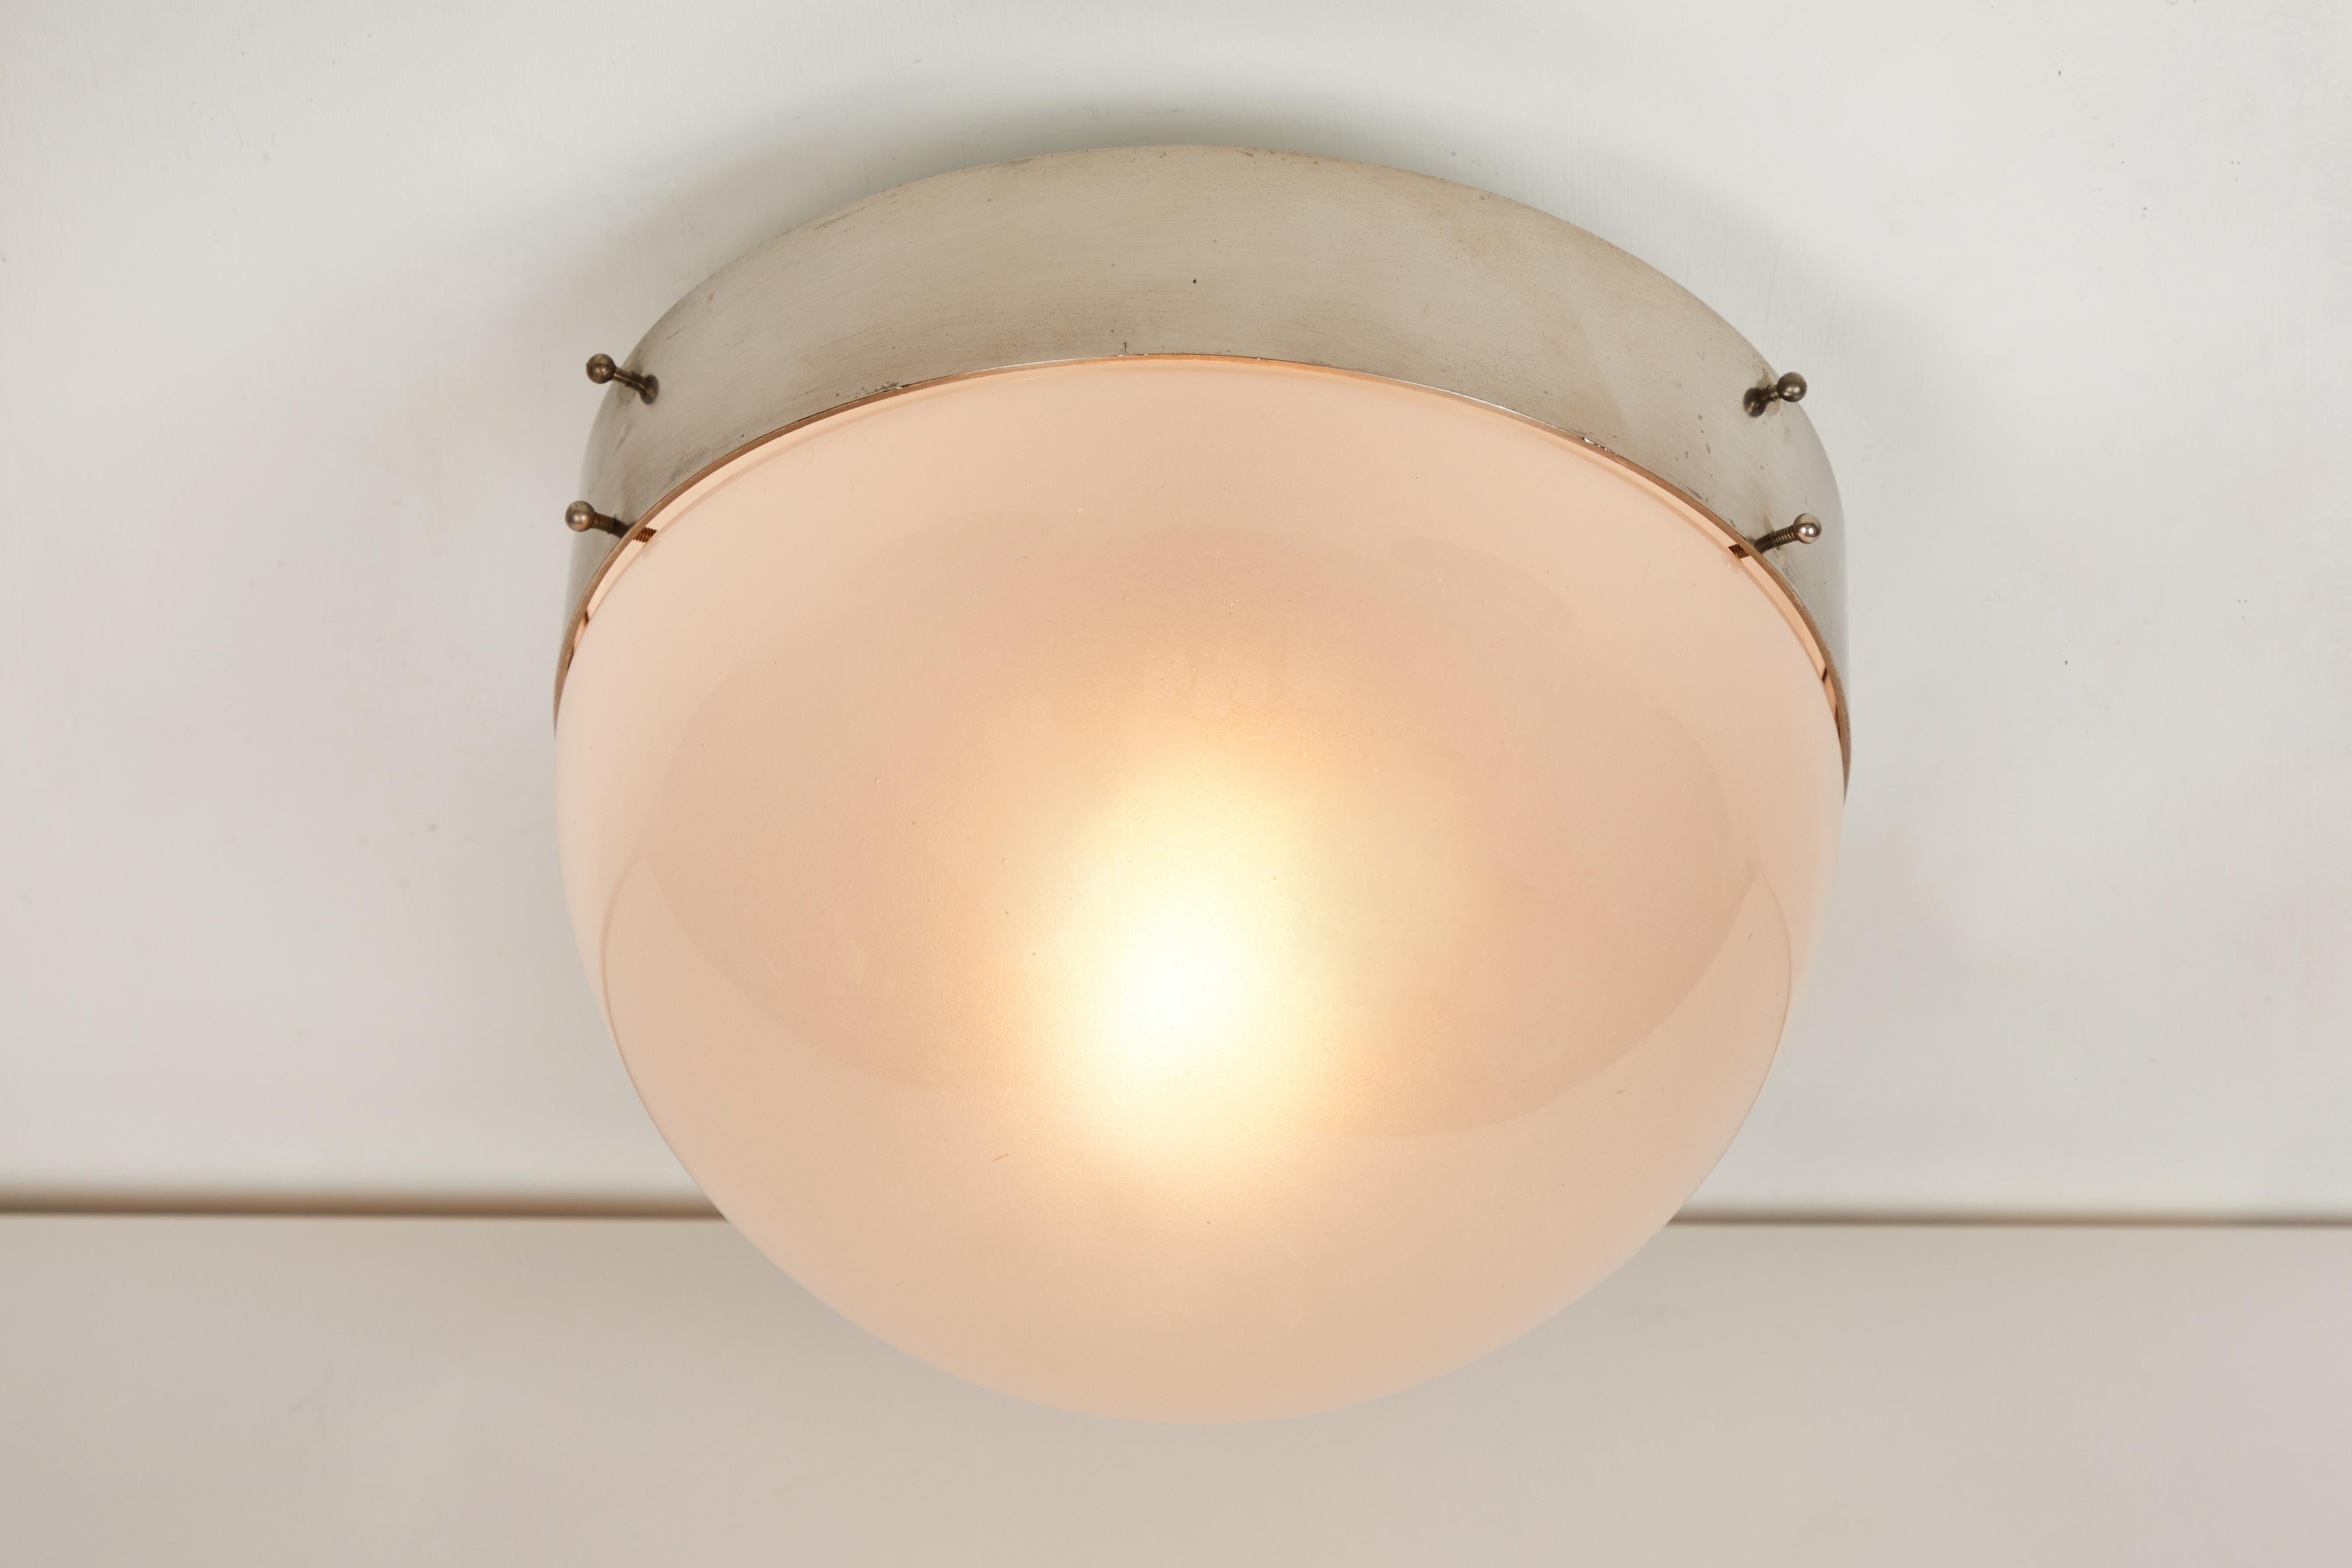 1960s Sergio Mazza 'Demi Clio' wall or ceiling lamp for Artemide. Executed in nickeled brass and opaline glass, Italy, circa 1960s. Clean and architectural, these hardwired lamps emit a pleasingly filtered light through hand blown opaline glass